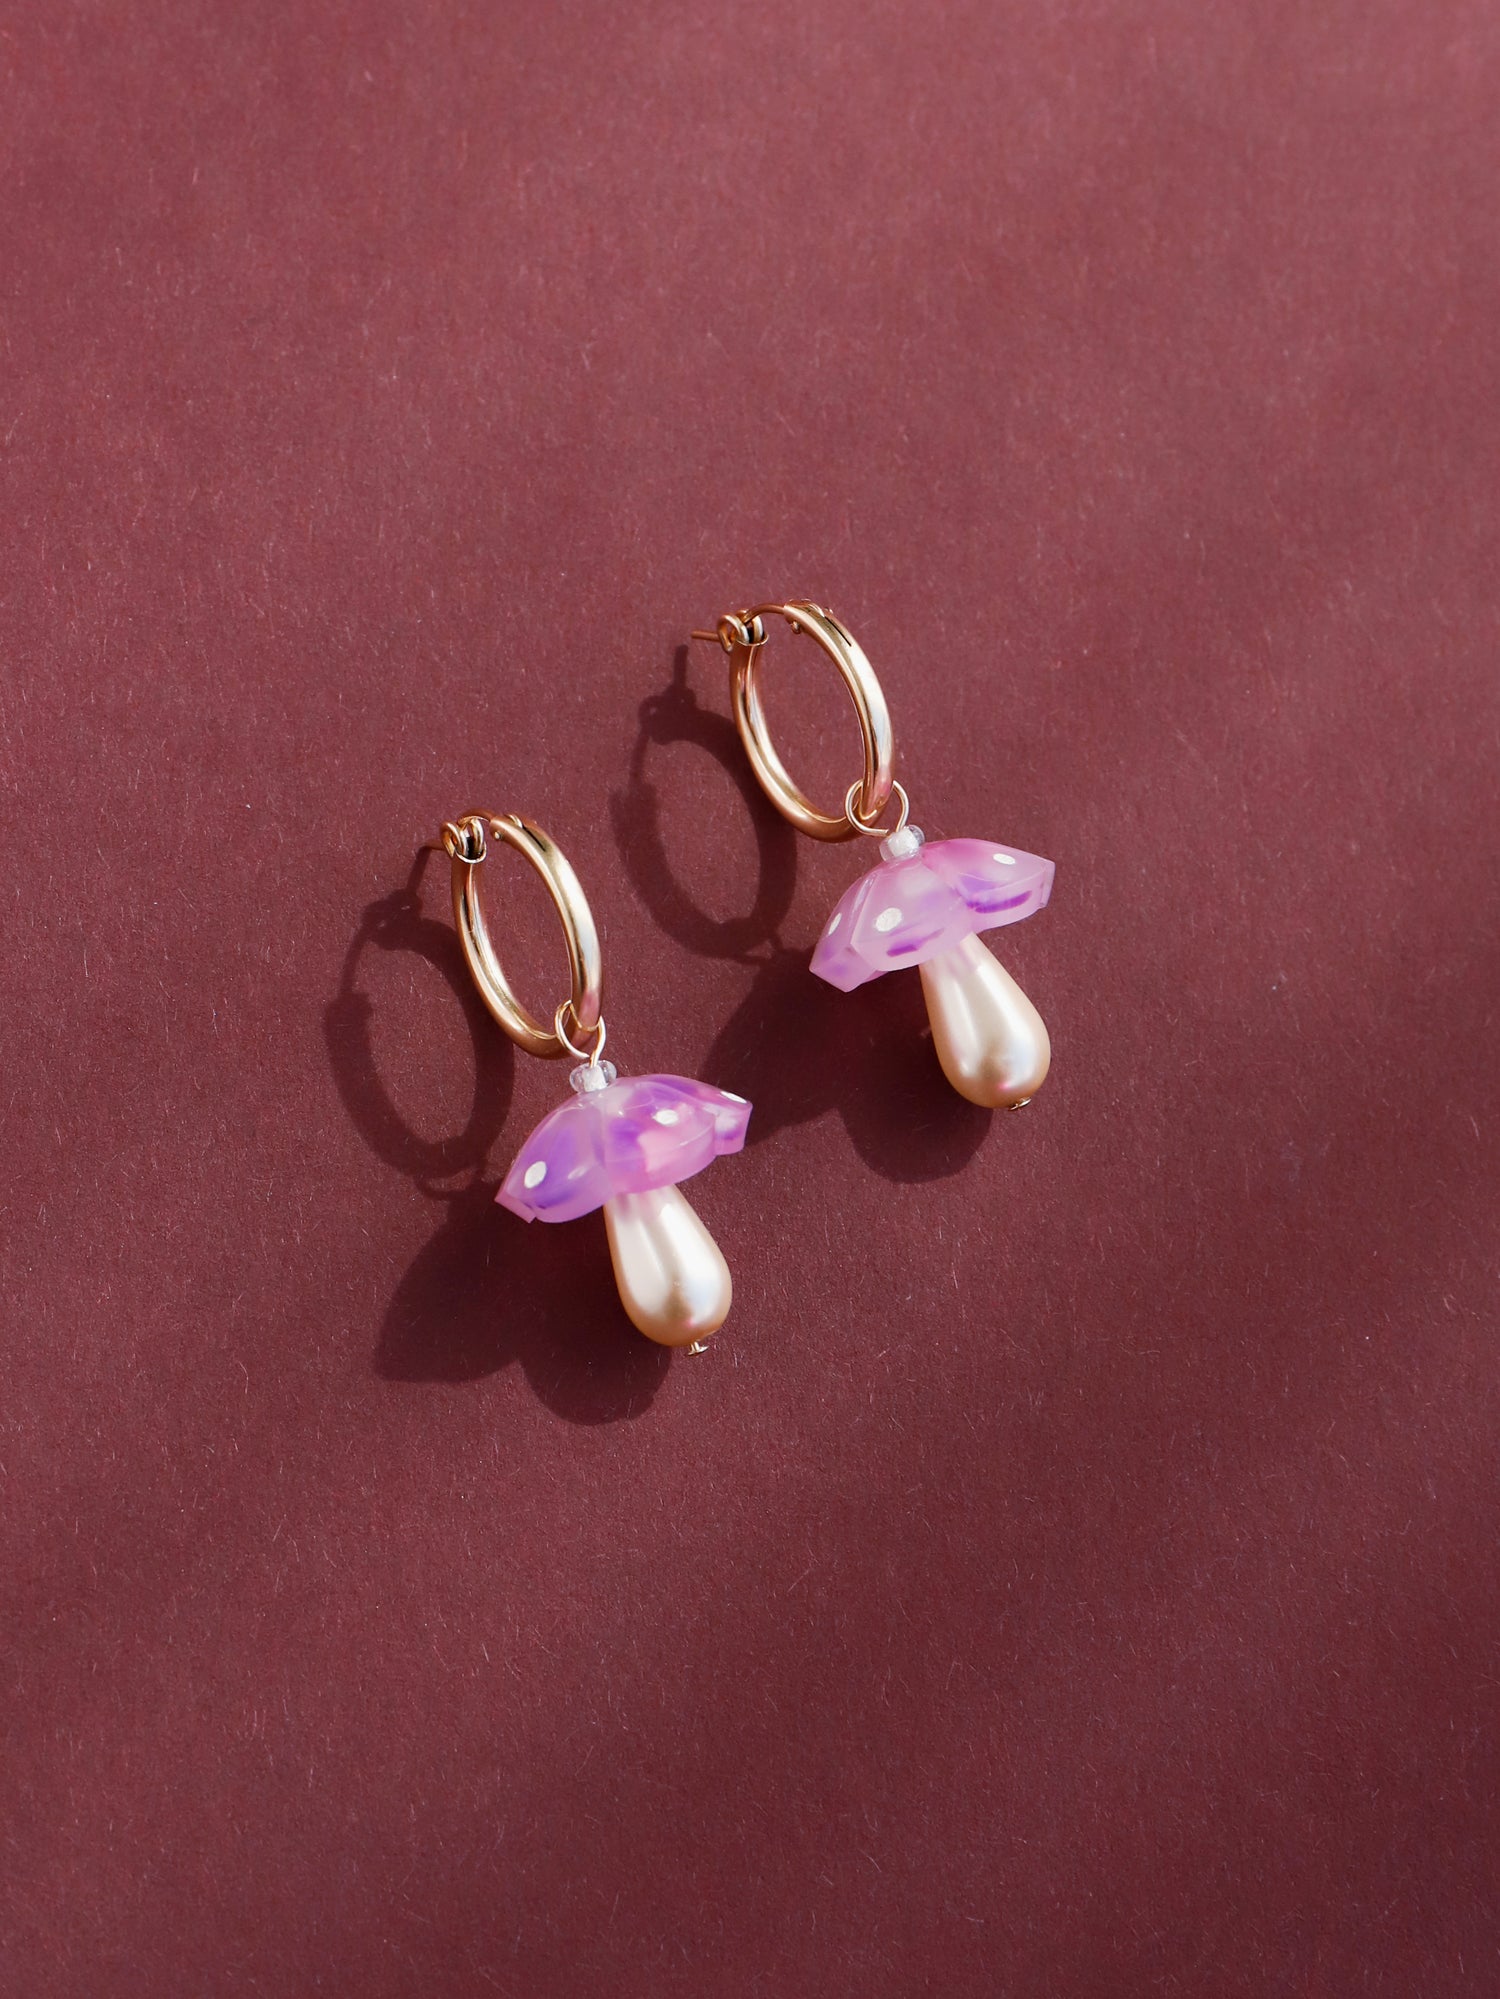 Mushroom charm hoops in lavender speckle. Made from heat-formed speckled acrylic with hand-inked details, and finished off with high quality Czech glass pearls and 14k gold-filled findings.